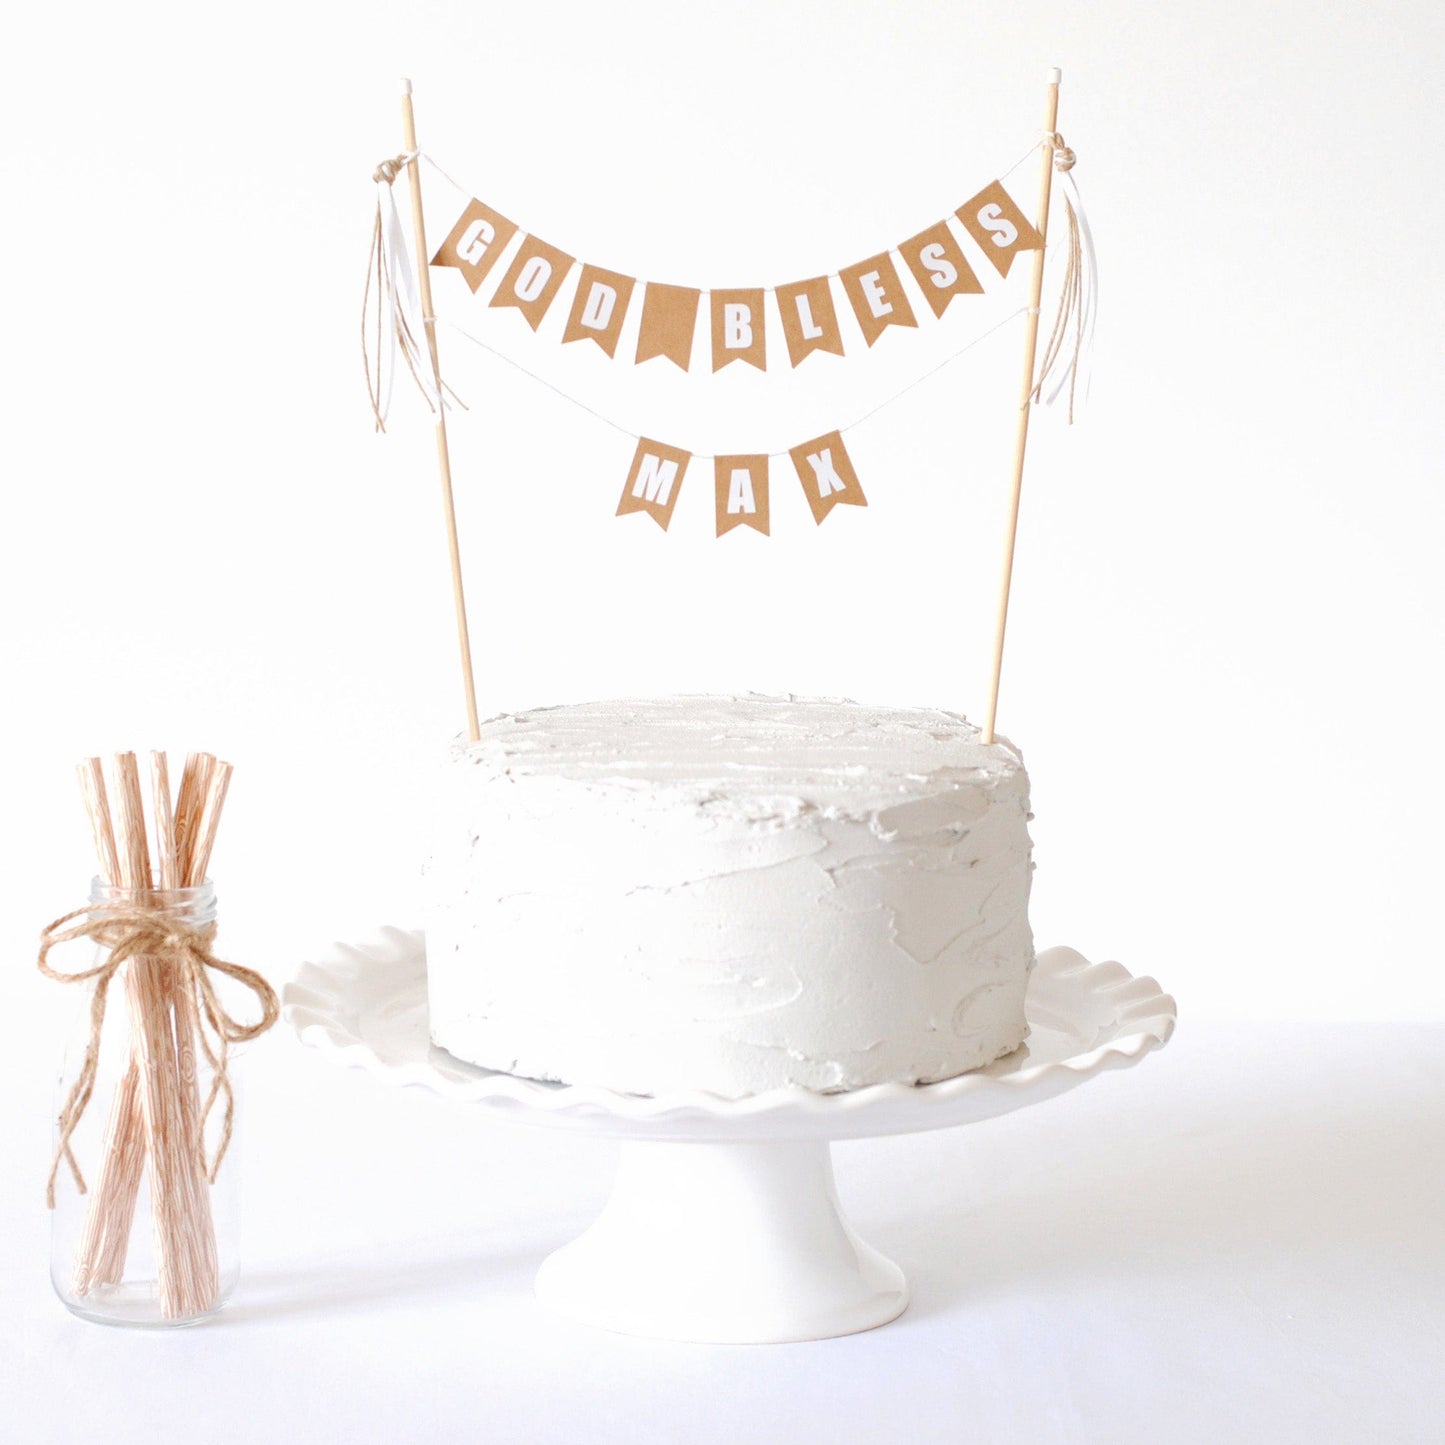 Christening & Communion Cakes | Claygate, Surrey | Afternoon Crumbs